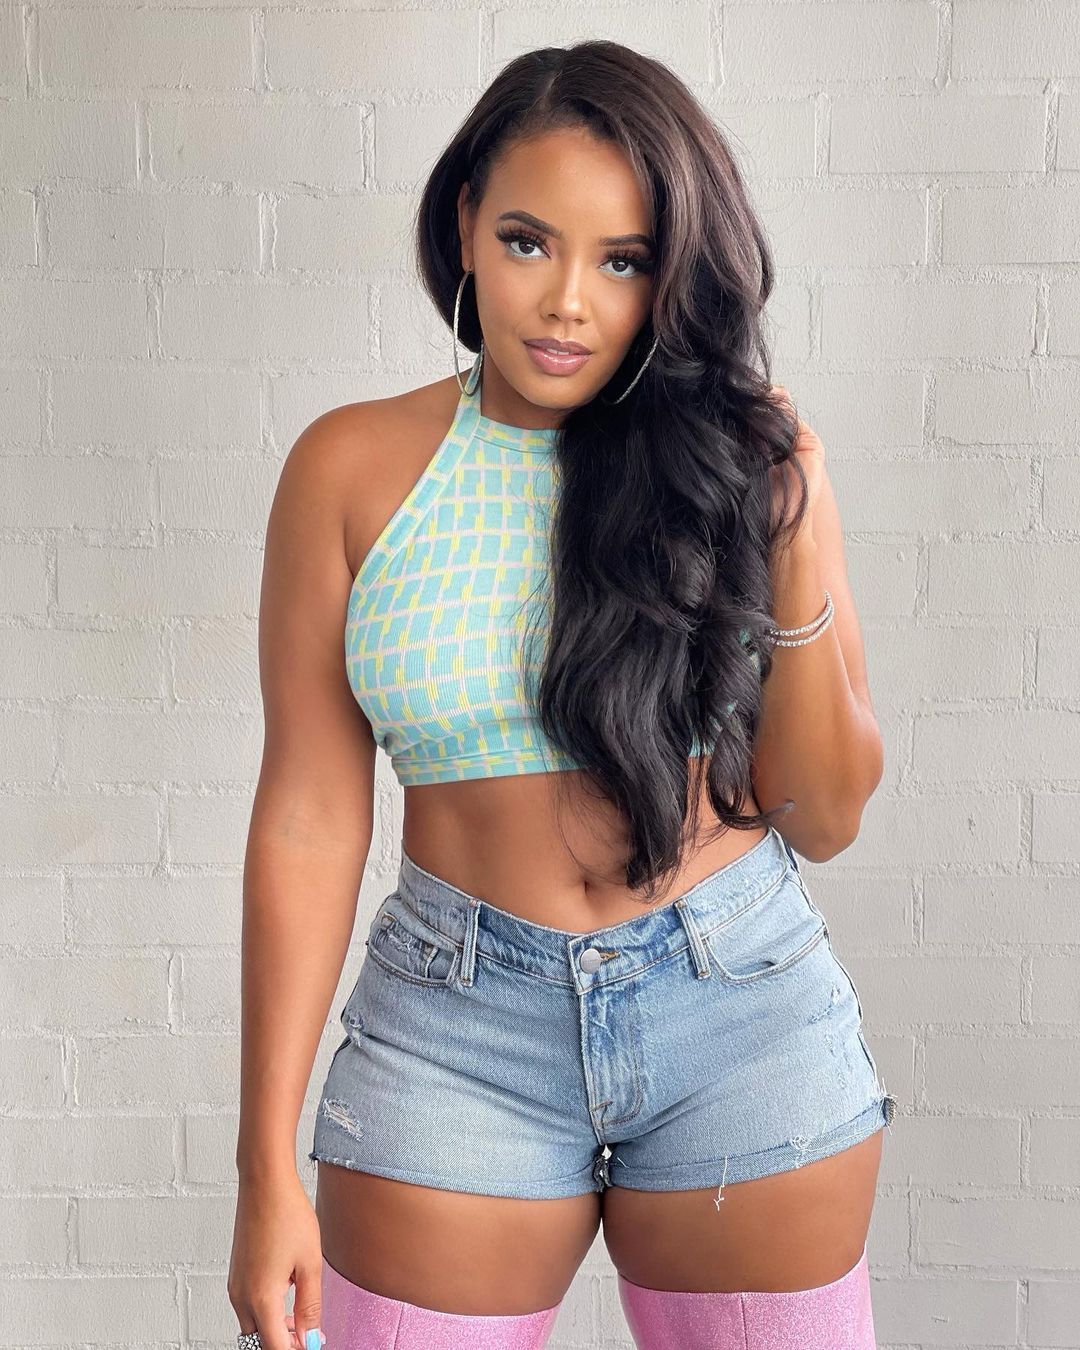 Angela Simmons in shorts and boots